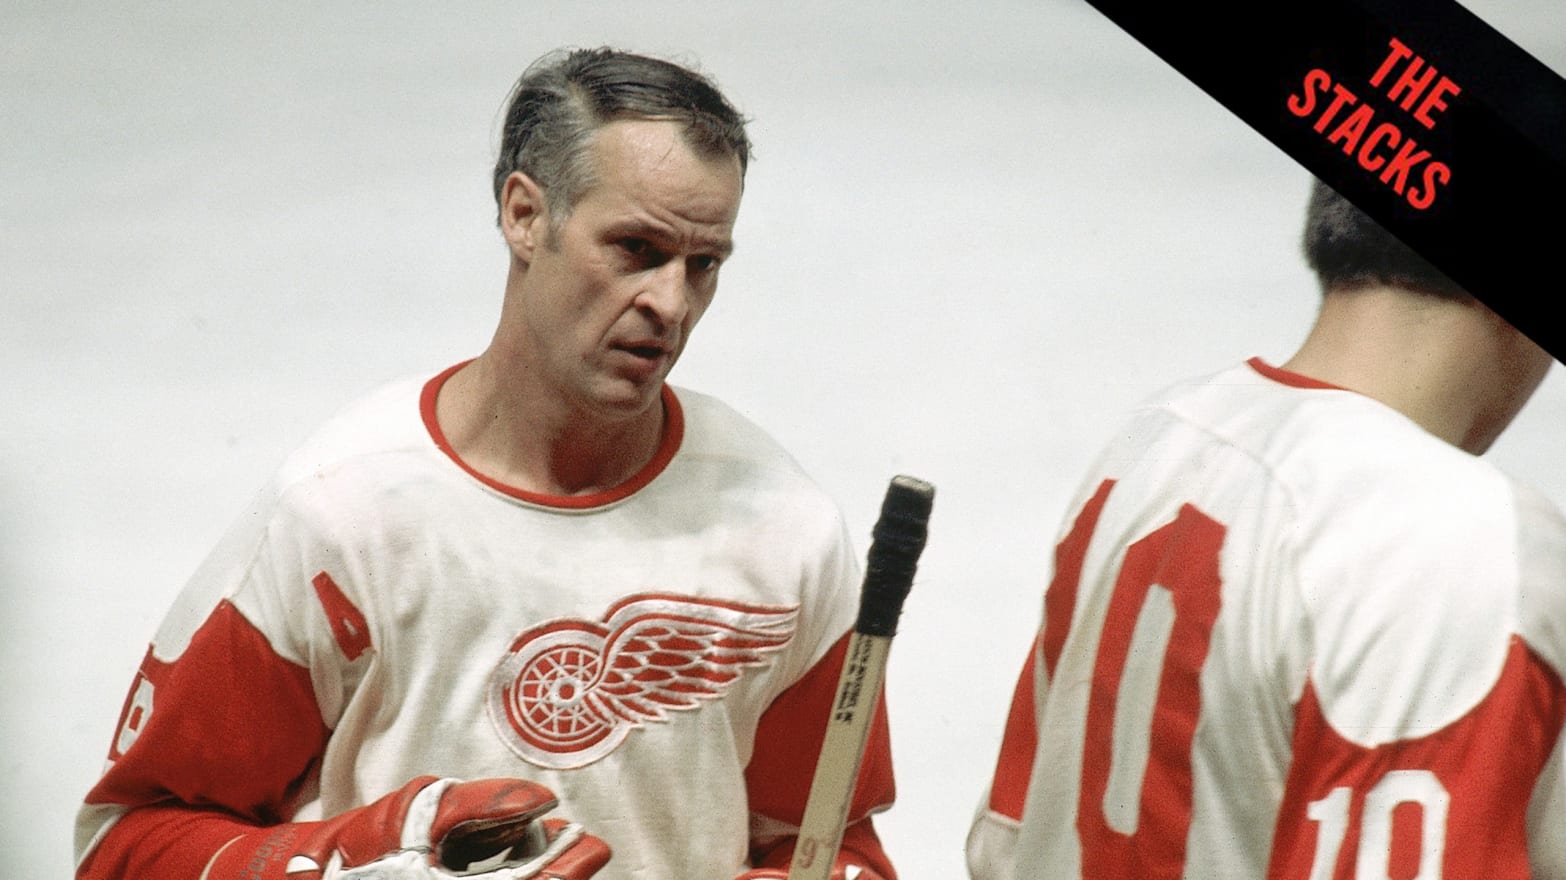 9 things you may not know about Gordie Howe